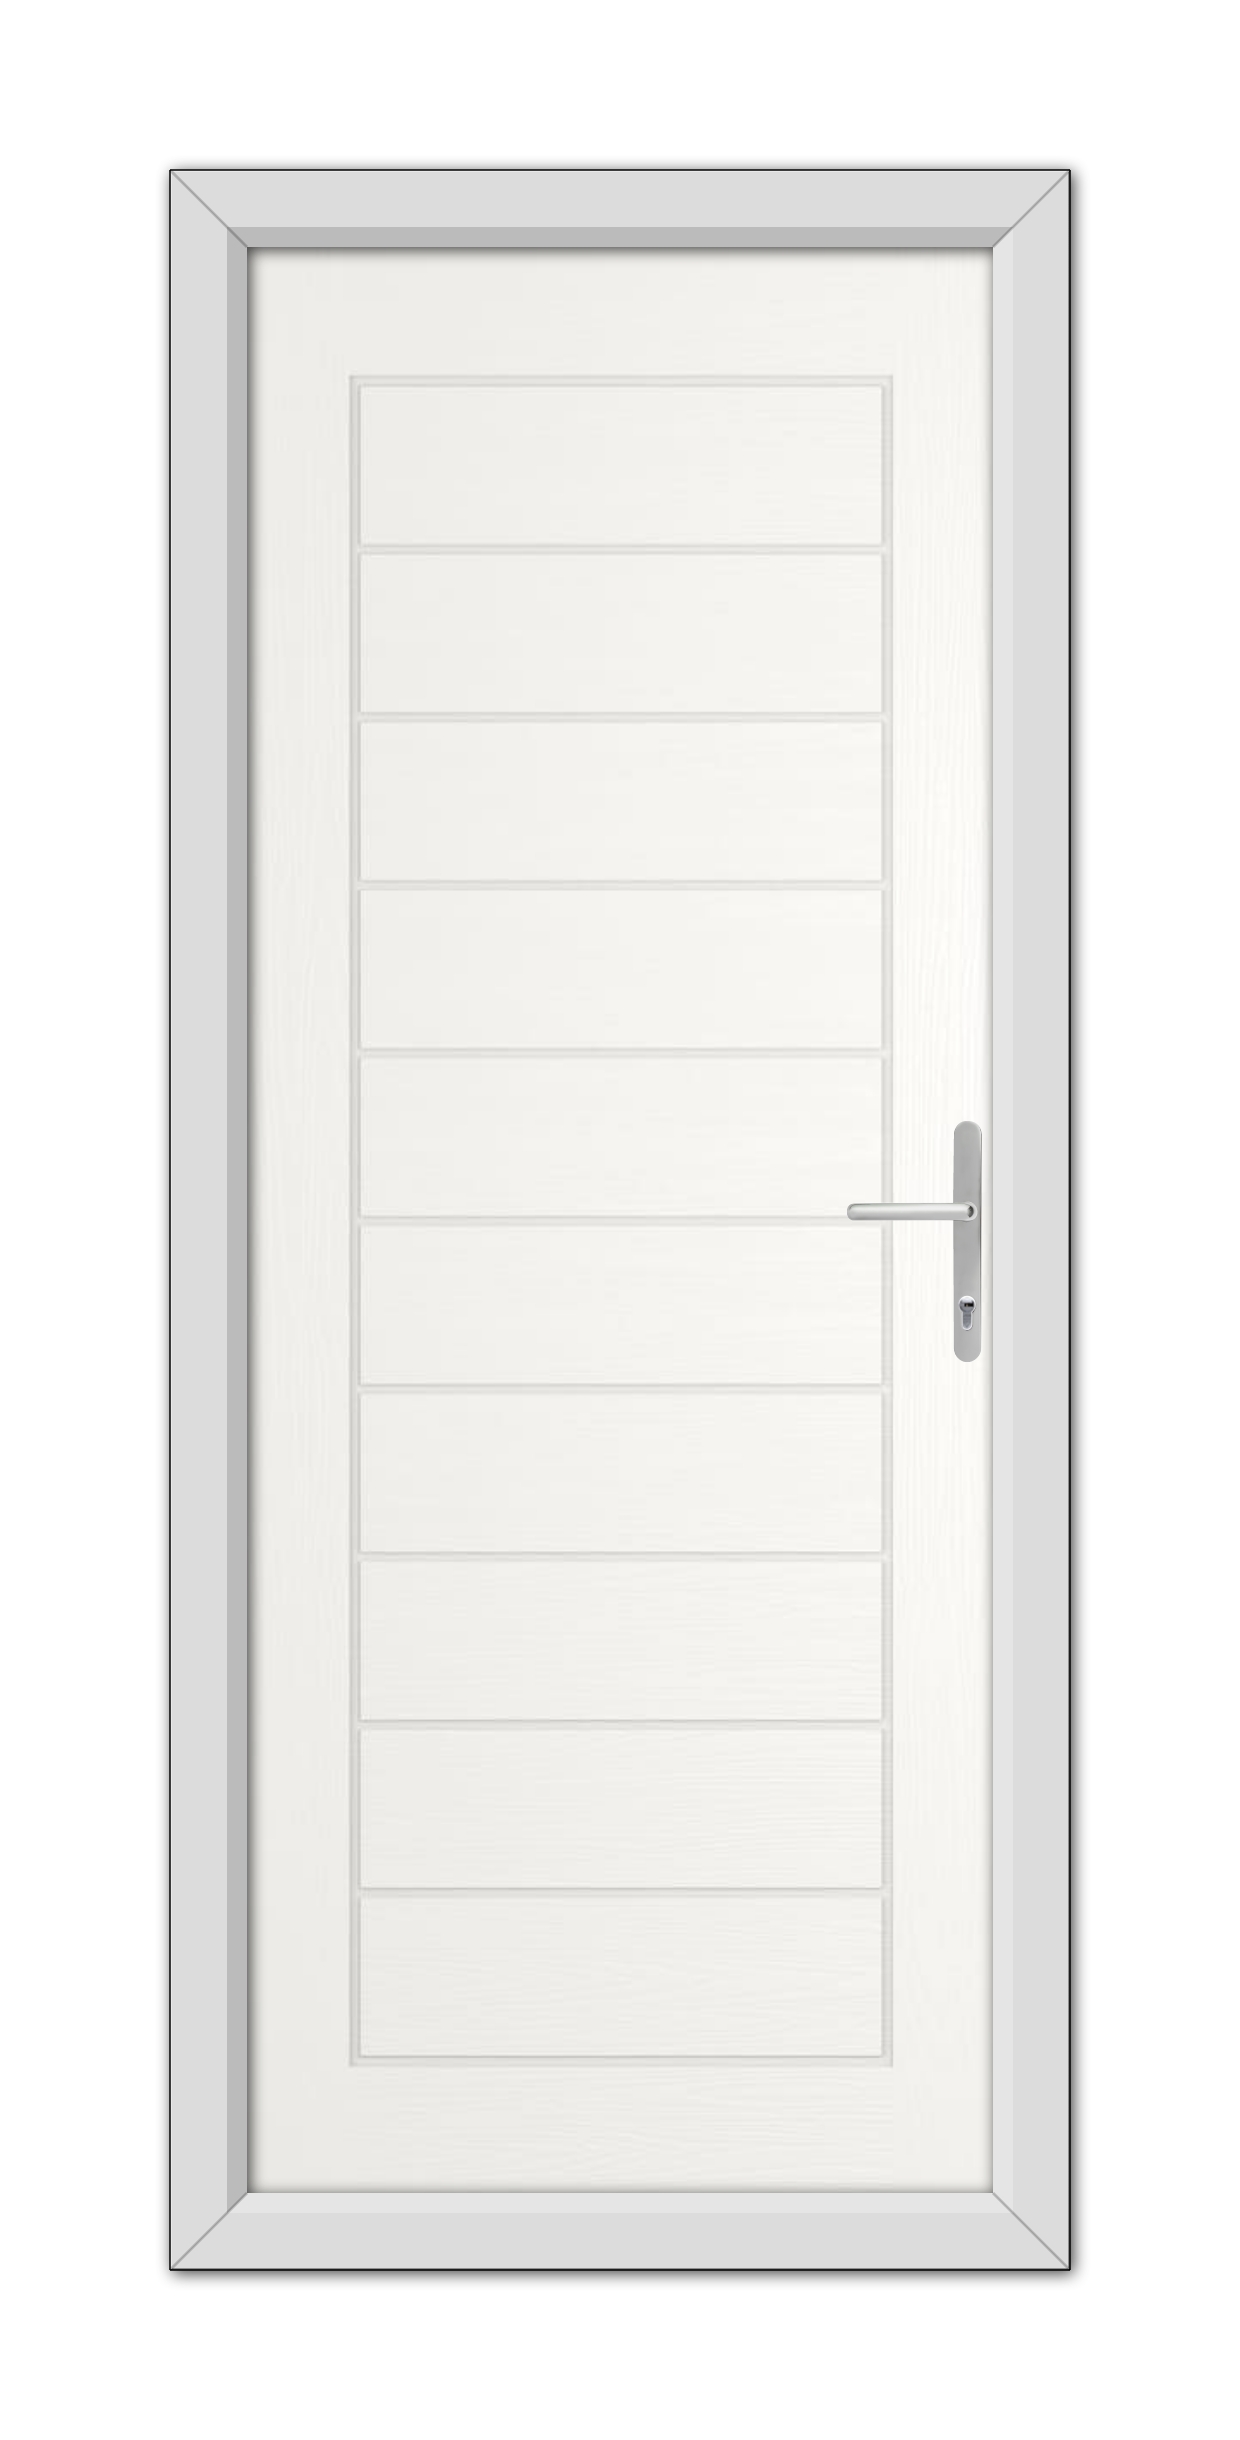 A modern White Cambridge Composite Door 48mm Timber Core with horizontal panels and a silver handle, framed within a simple white door frame.